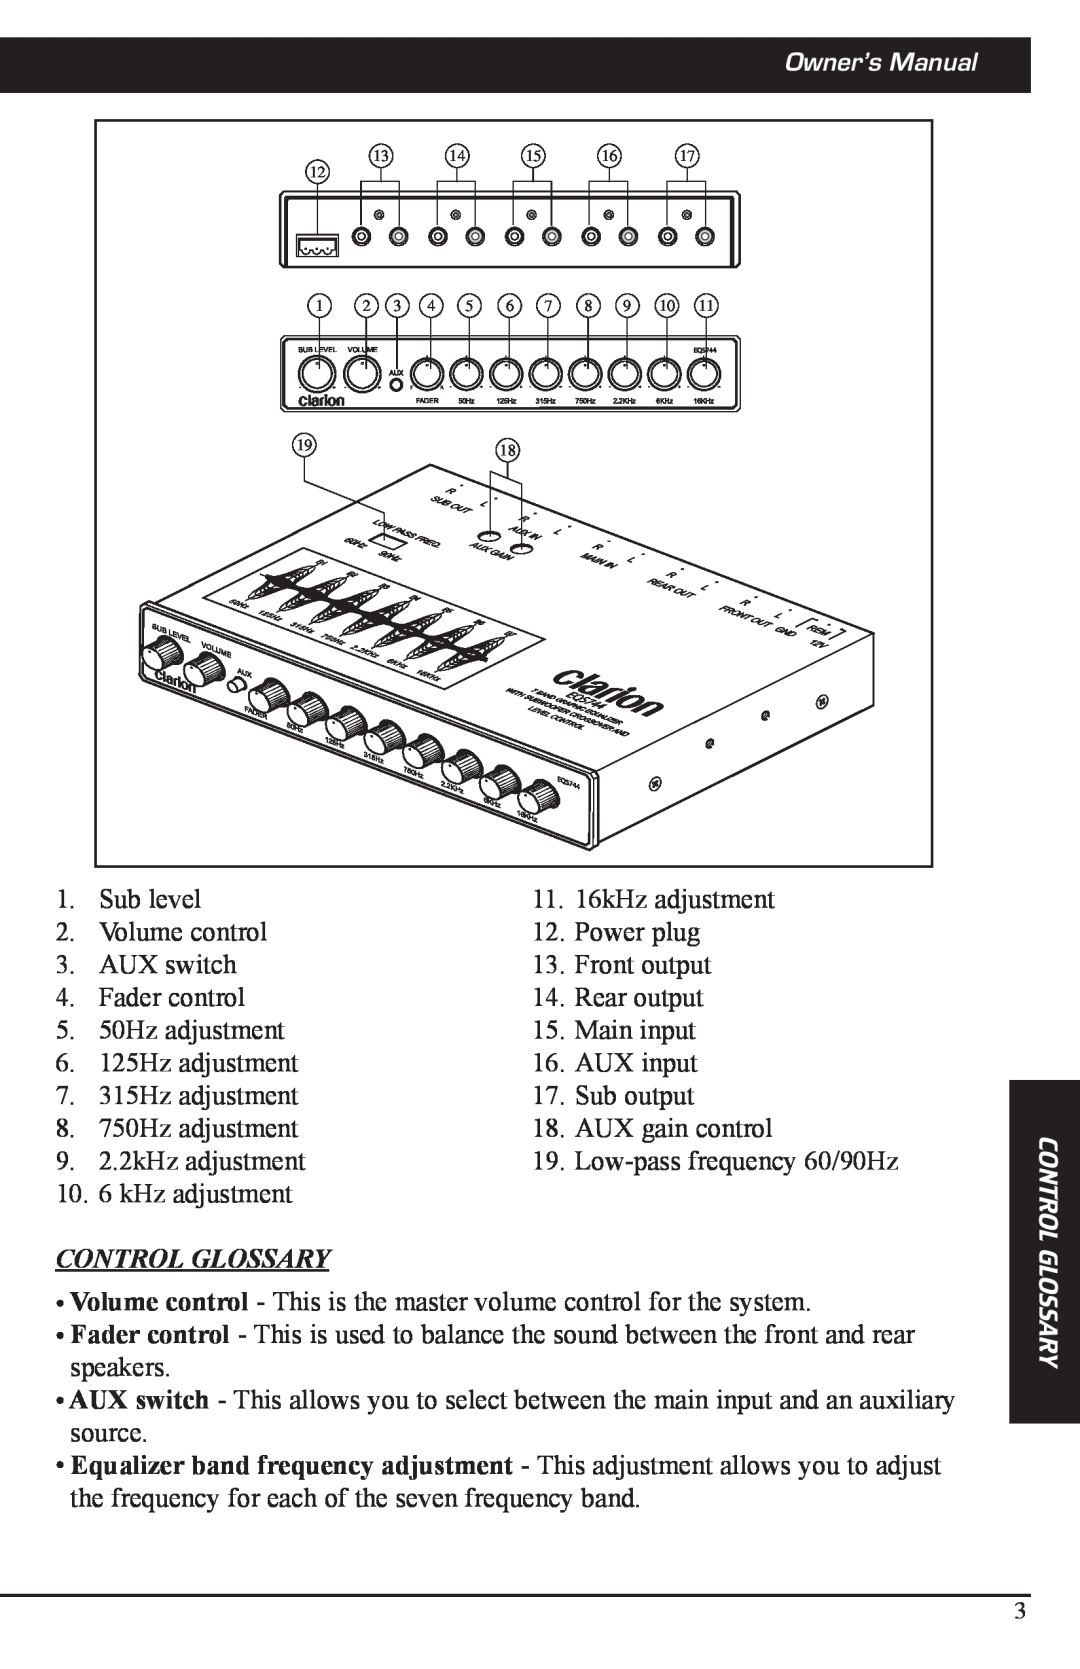 Clarion EQS744 manual Control Glossary 